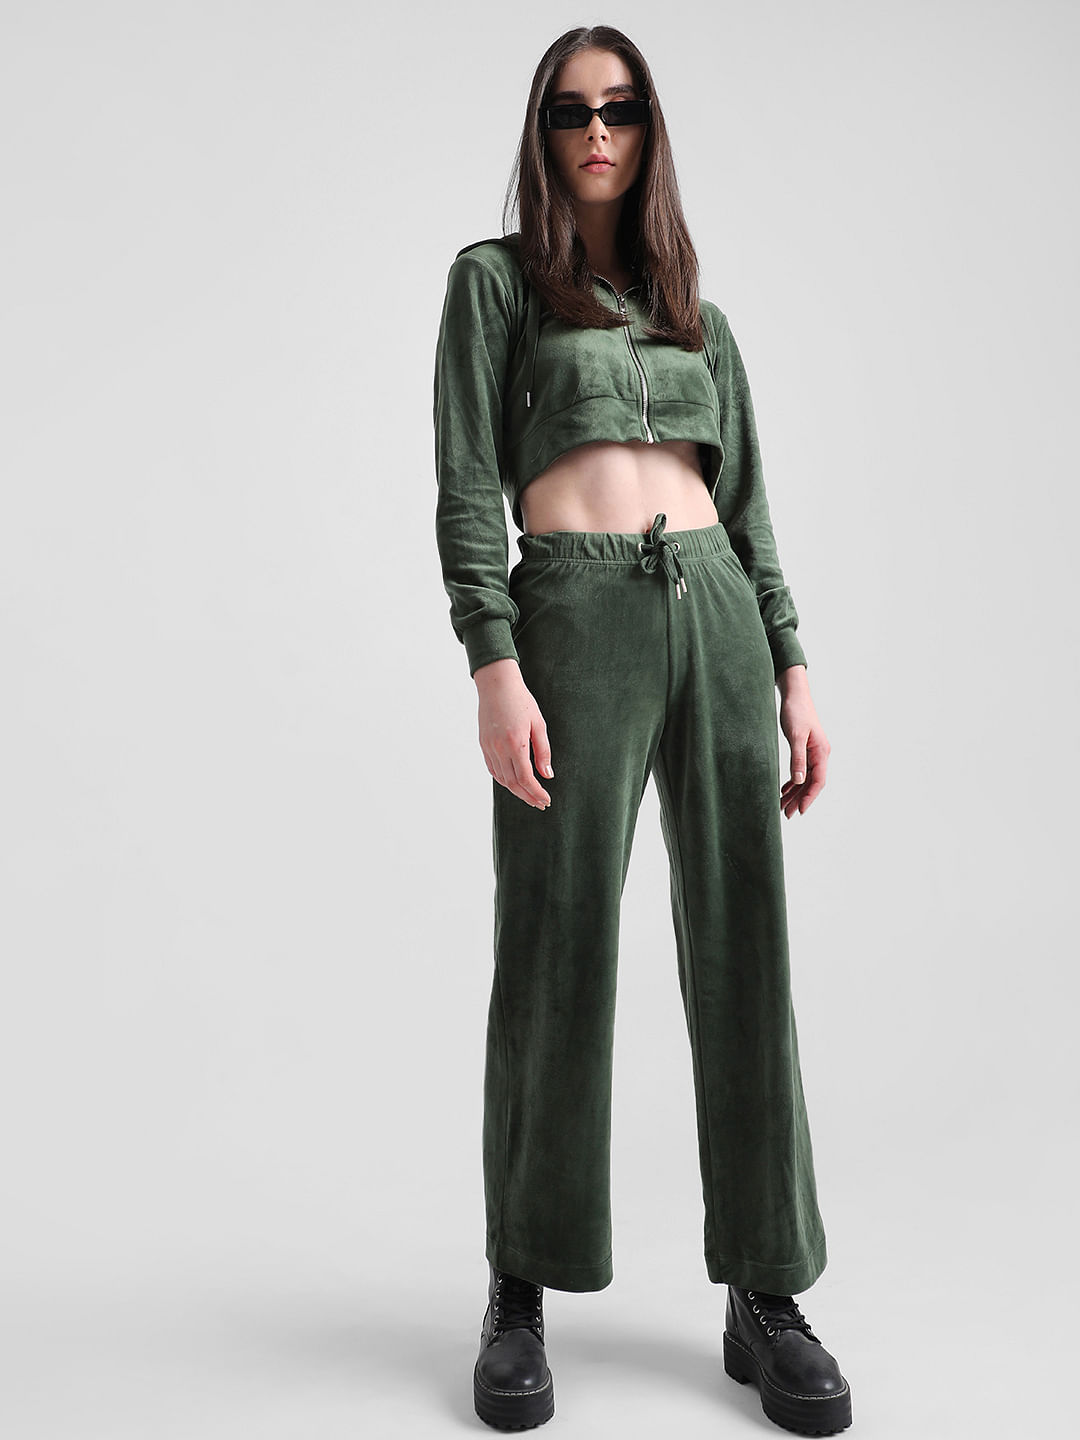 Crop Tops & Oversized Pants Are A Summer Outfit Dream For Those Who Love  Playing With Proportion